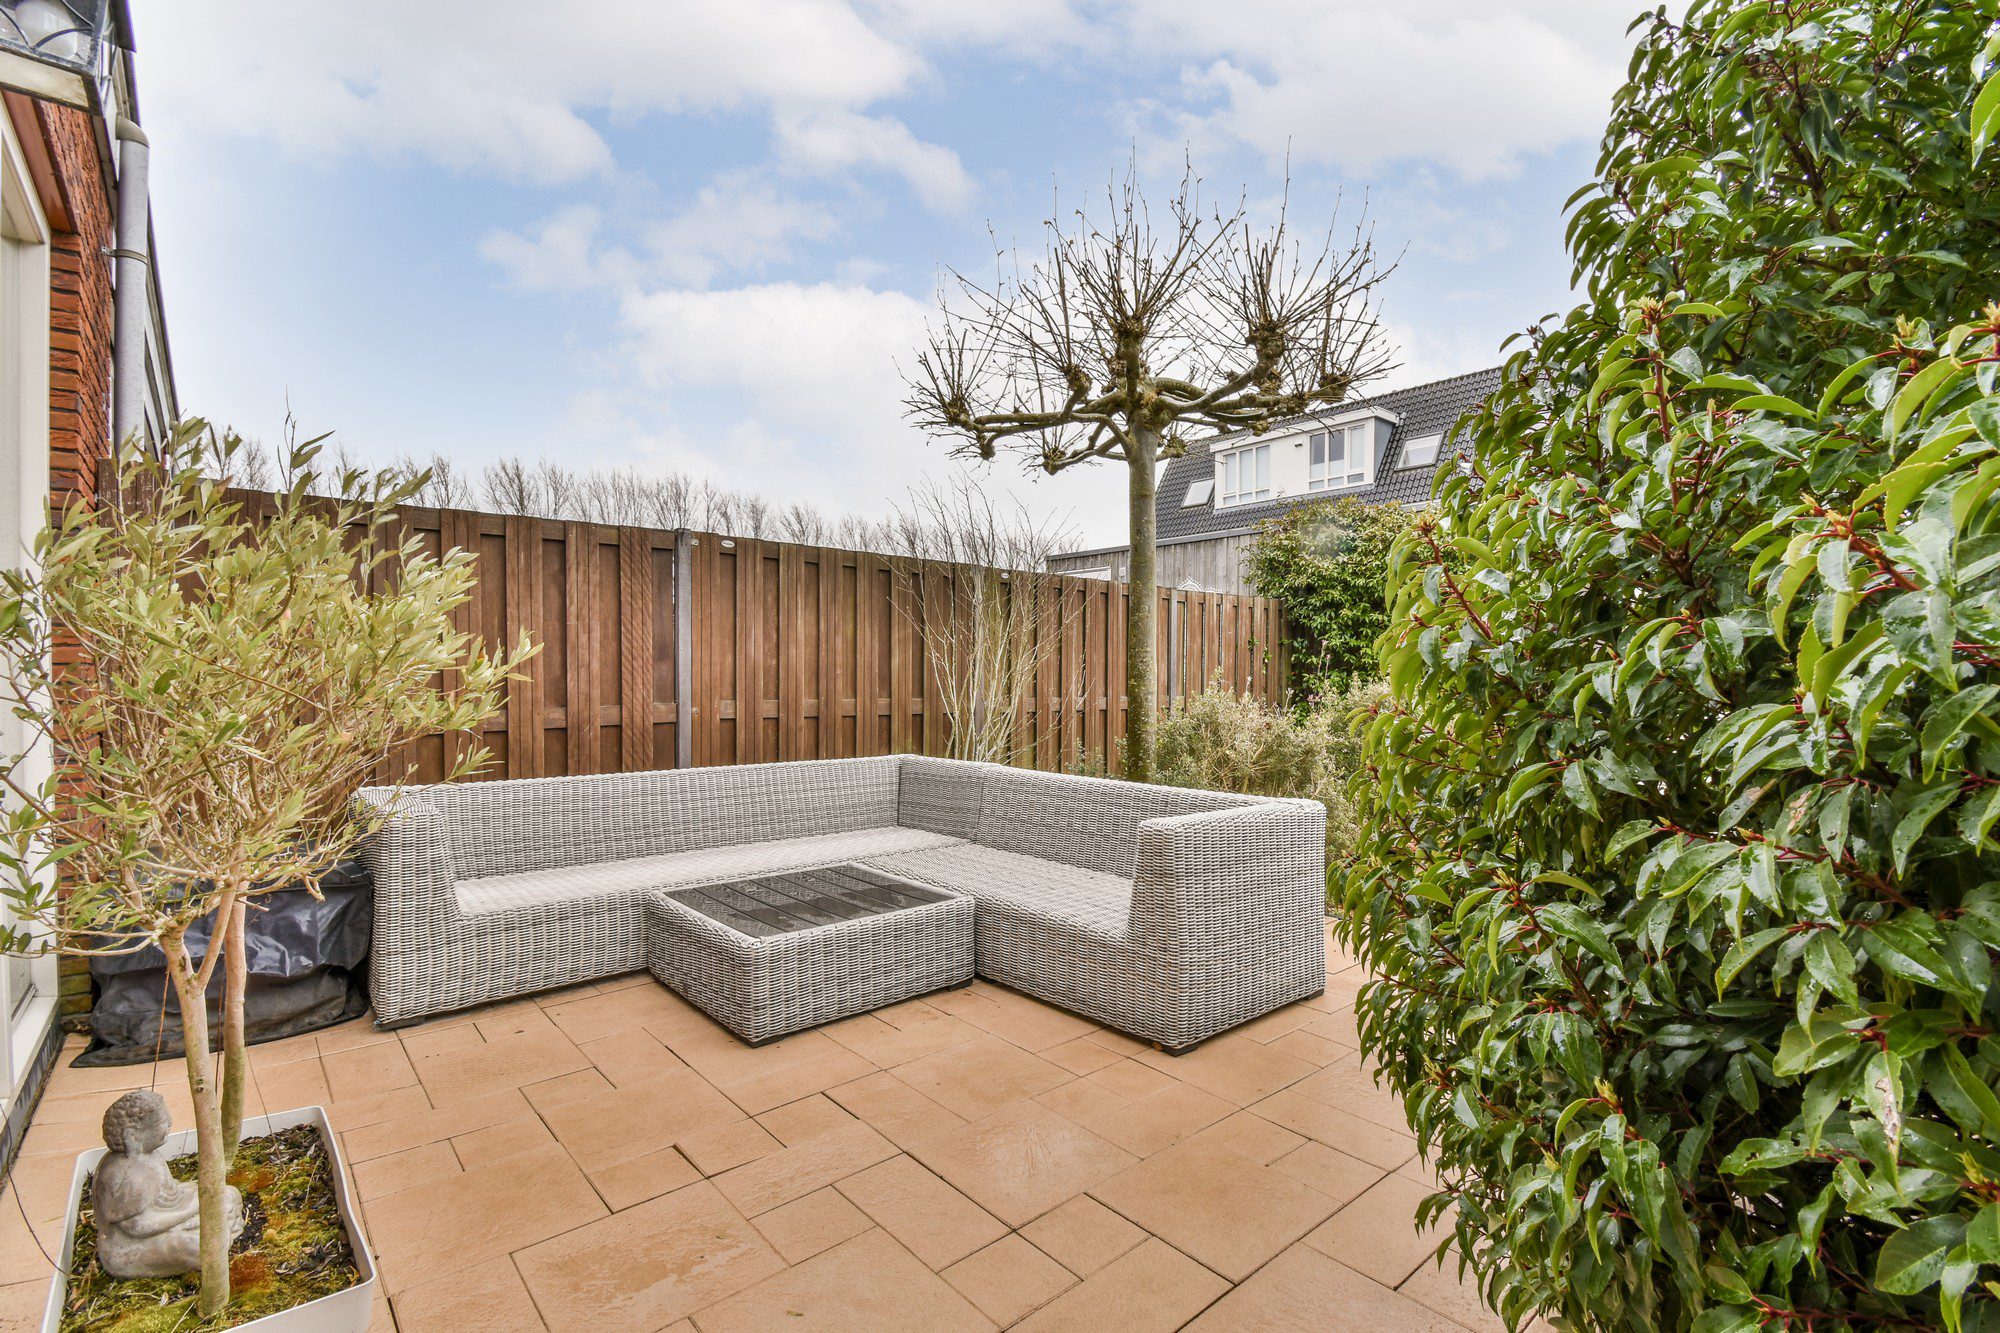 The image shows a neatly kept outdoor patio area of a house. There is a modern rattan garden lounge set comprised of a corner sofa and a table, inviting for relaxation or social gatherings. The flooring of the patio is made of large, square terracotta tiles.On the left side, a small olive tree is potted in a square container, and a statue of a seated child figure can be seen at the base of the tree’s pot. The garden is bordered by tall wooden fencing, which provides privacy. There is a leafless tree in the background which suggests that the photo might have been taken in a dormant season for some plants. To the right, there is a healthy, green, leafy shrub or small tree with glossy leaves, possibly camellia or a similar variety given the red stems and dark green leaves.The sky is somewhat overcast, indicating a cloudy day, and the top of a residential building can be seen in the background beyond the fence, suggesting a suburban setting.